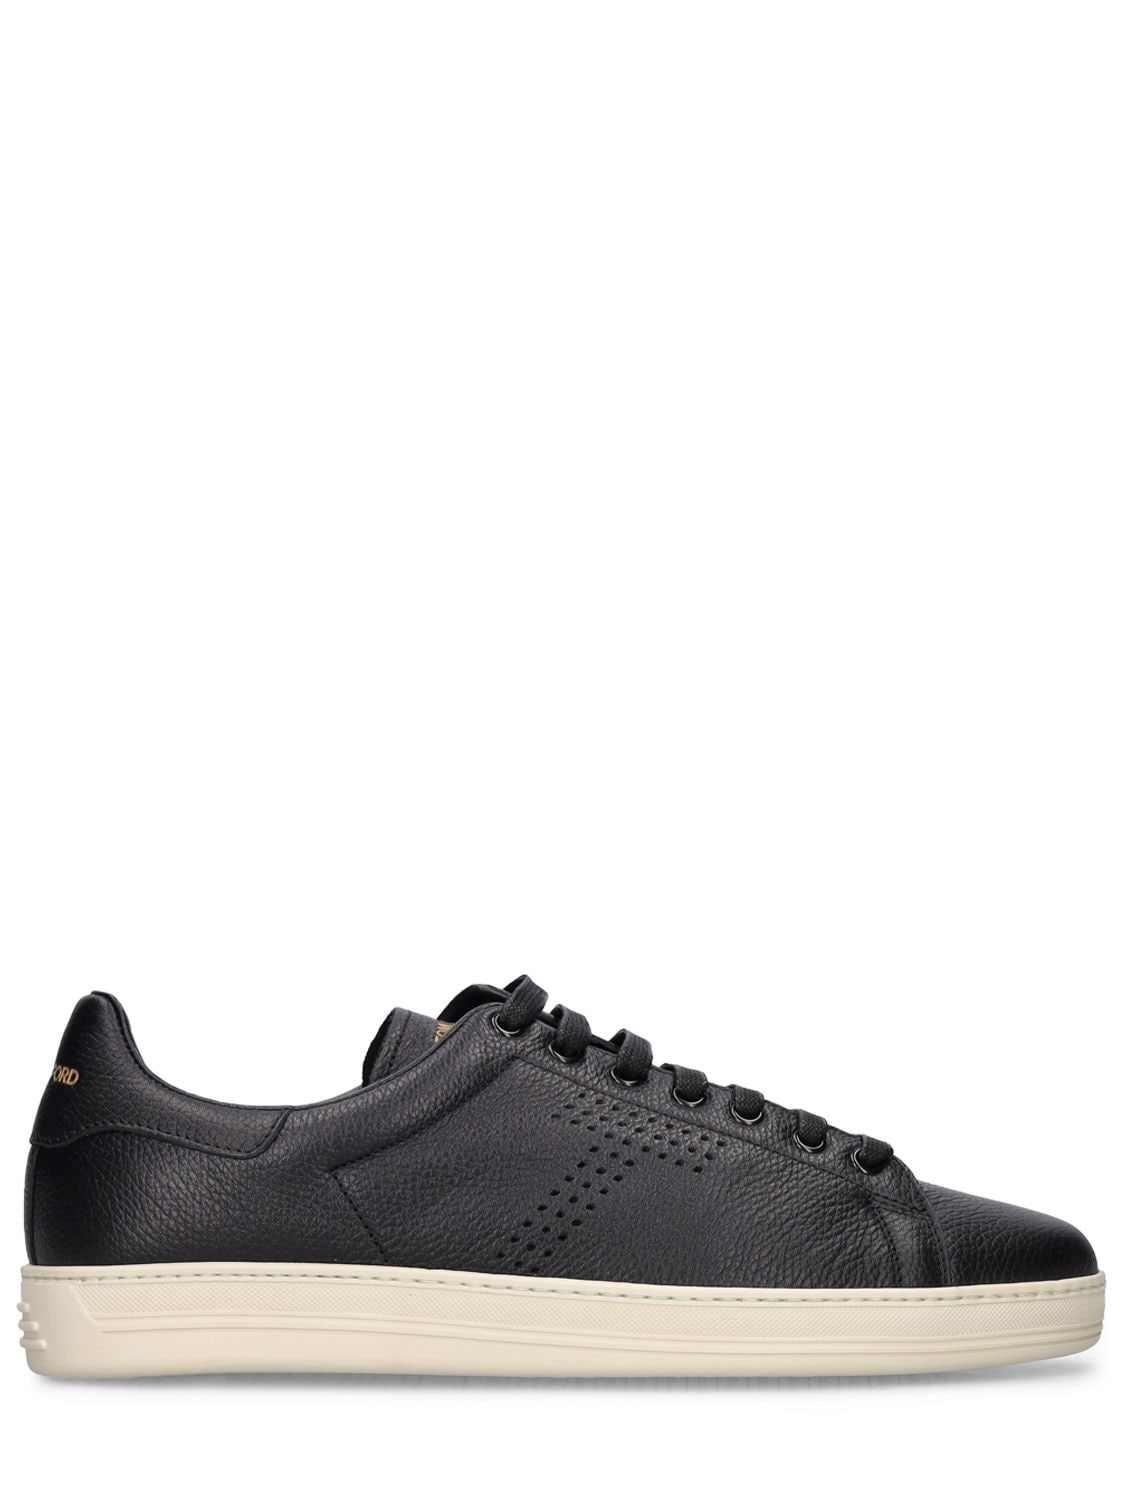 Image of Grain Leather Low Top Sneakers